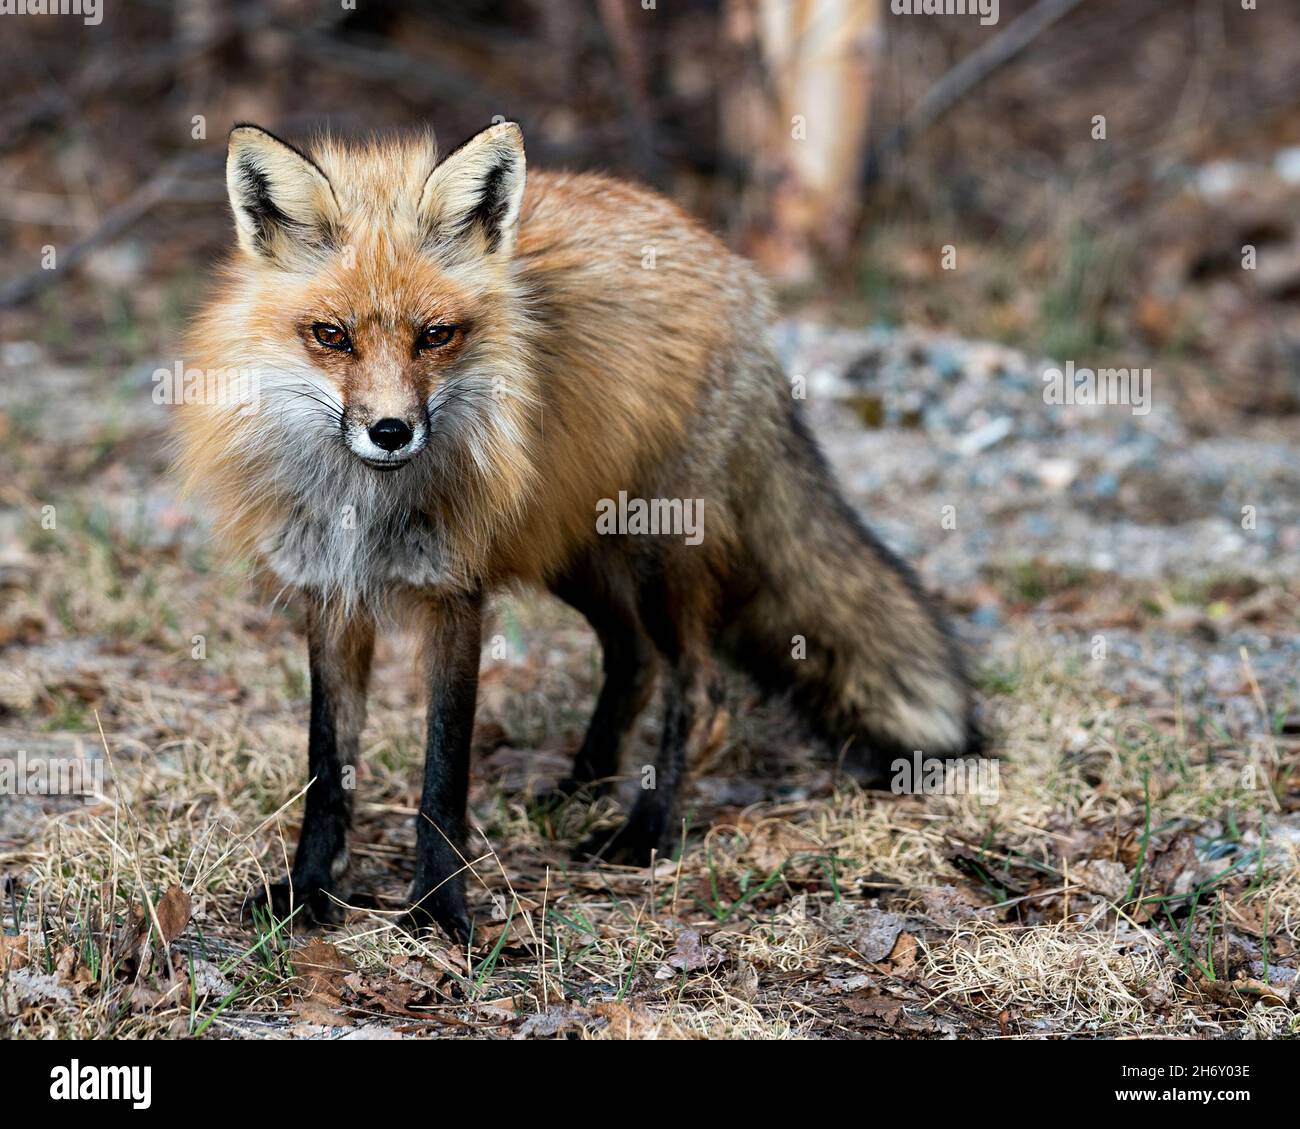 Red fox close-up profile in the springtime with blur background, displaying fox tail, fur, in its environment and habitat. Fox Portrait. Photo. Stock Photo